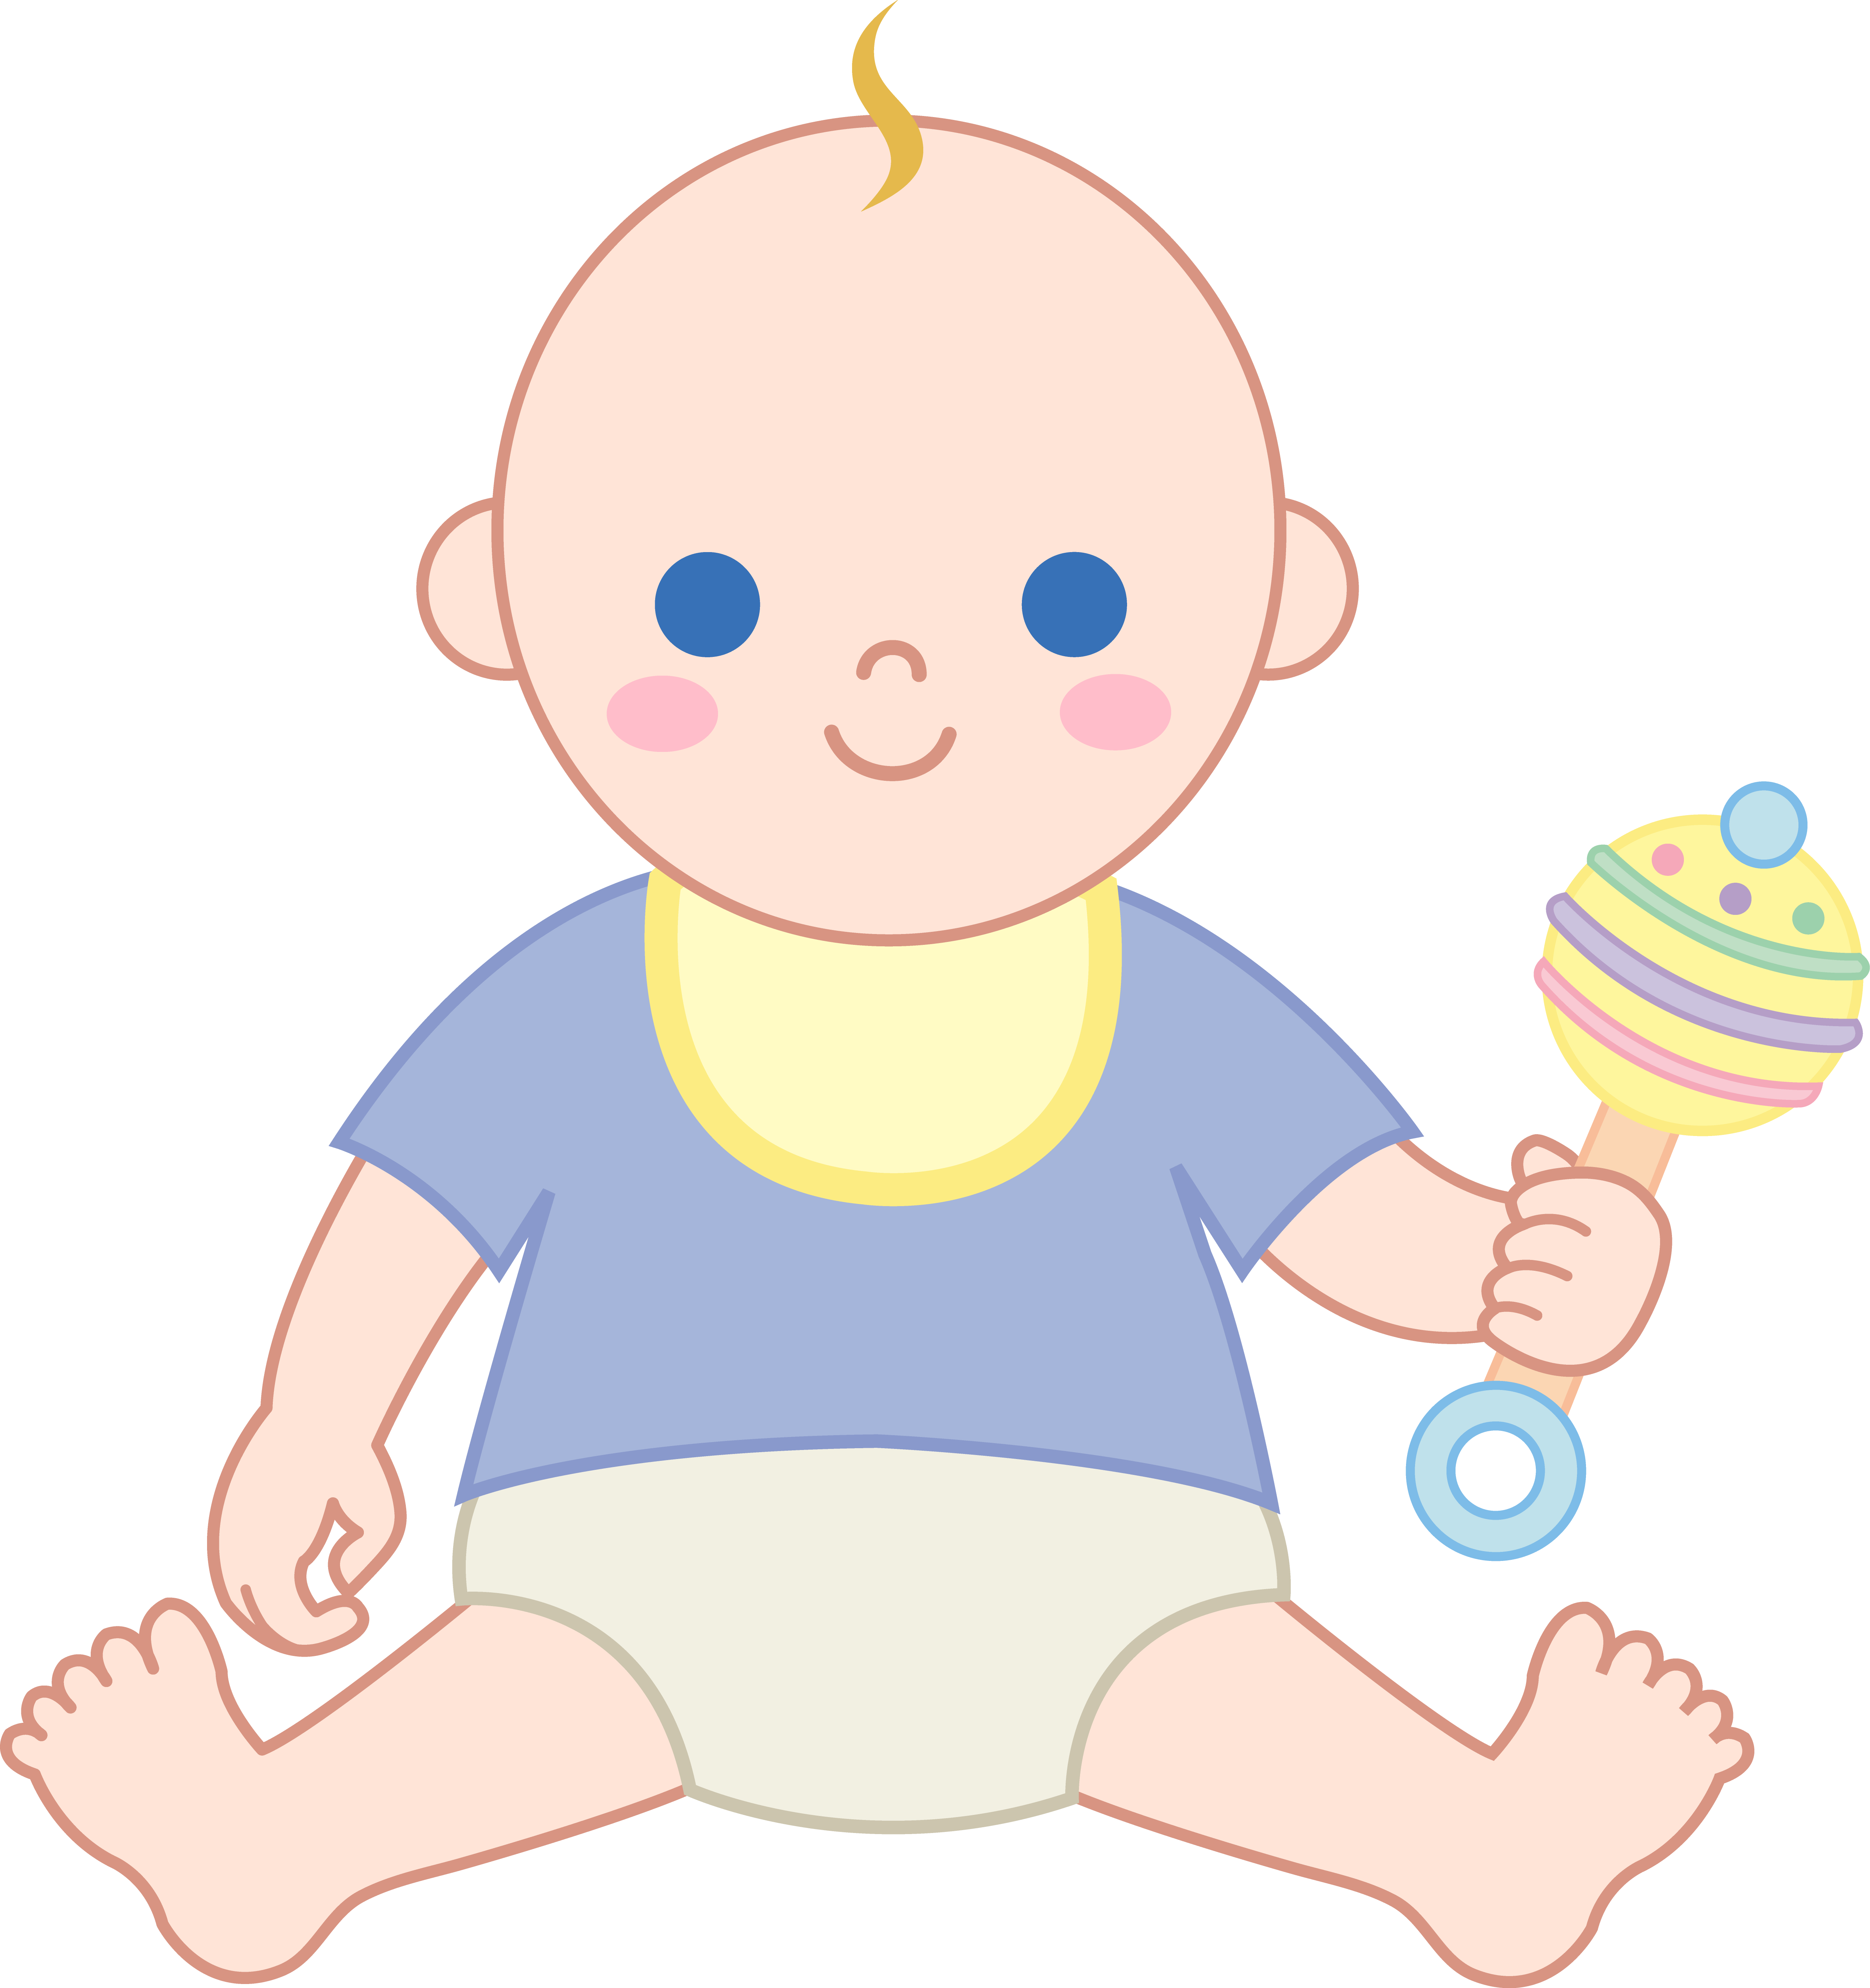 Infant Child Cute Baby Transparent Background Png Clipart Hiclipart Images